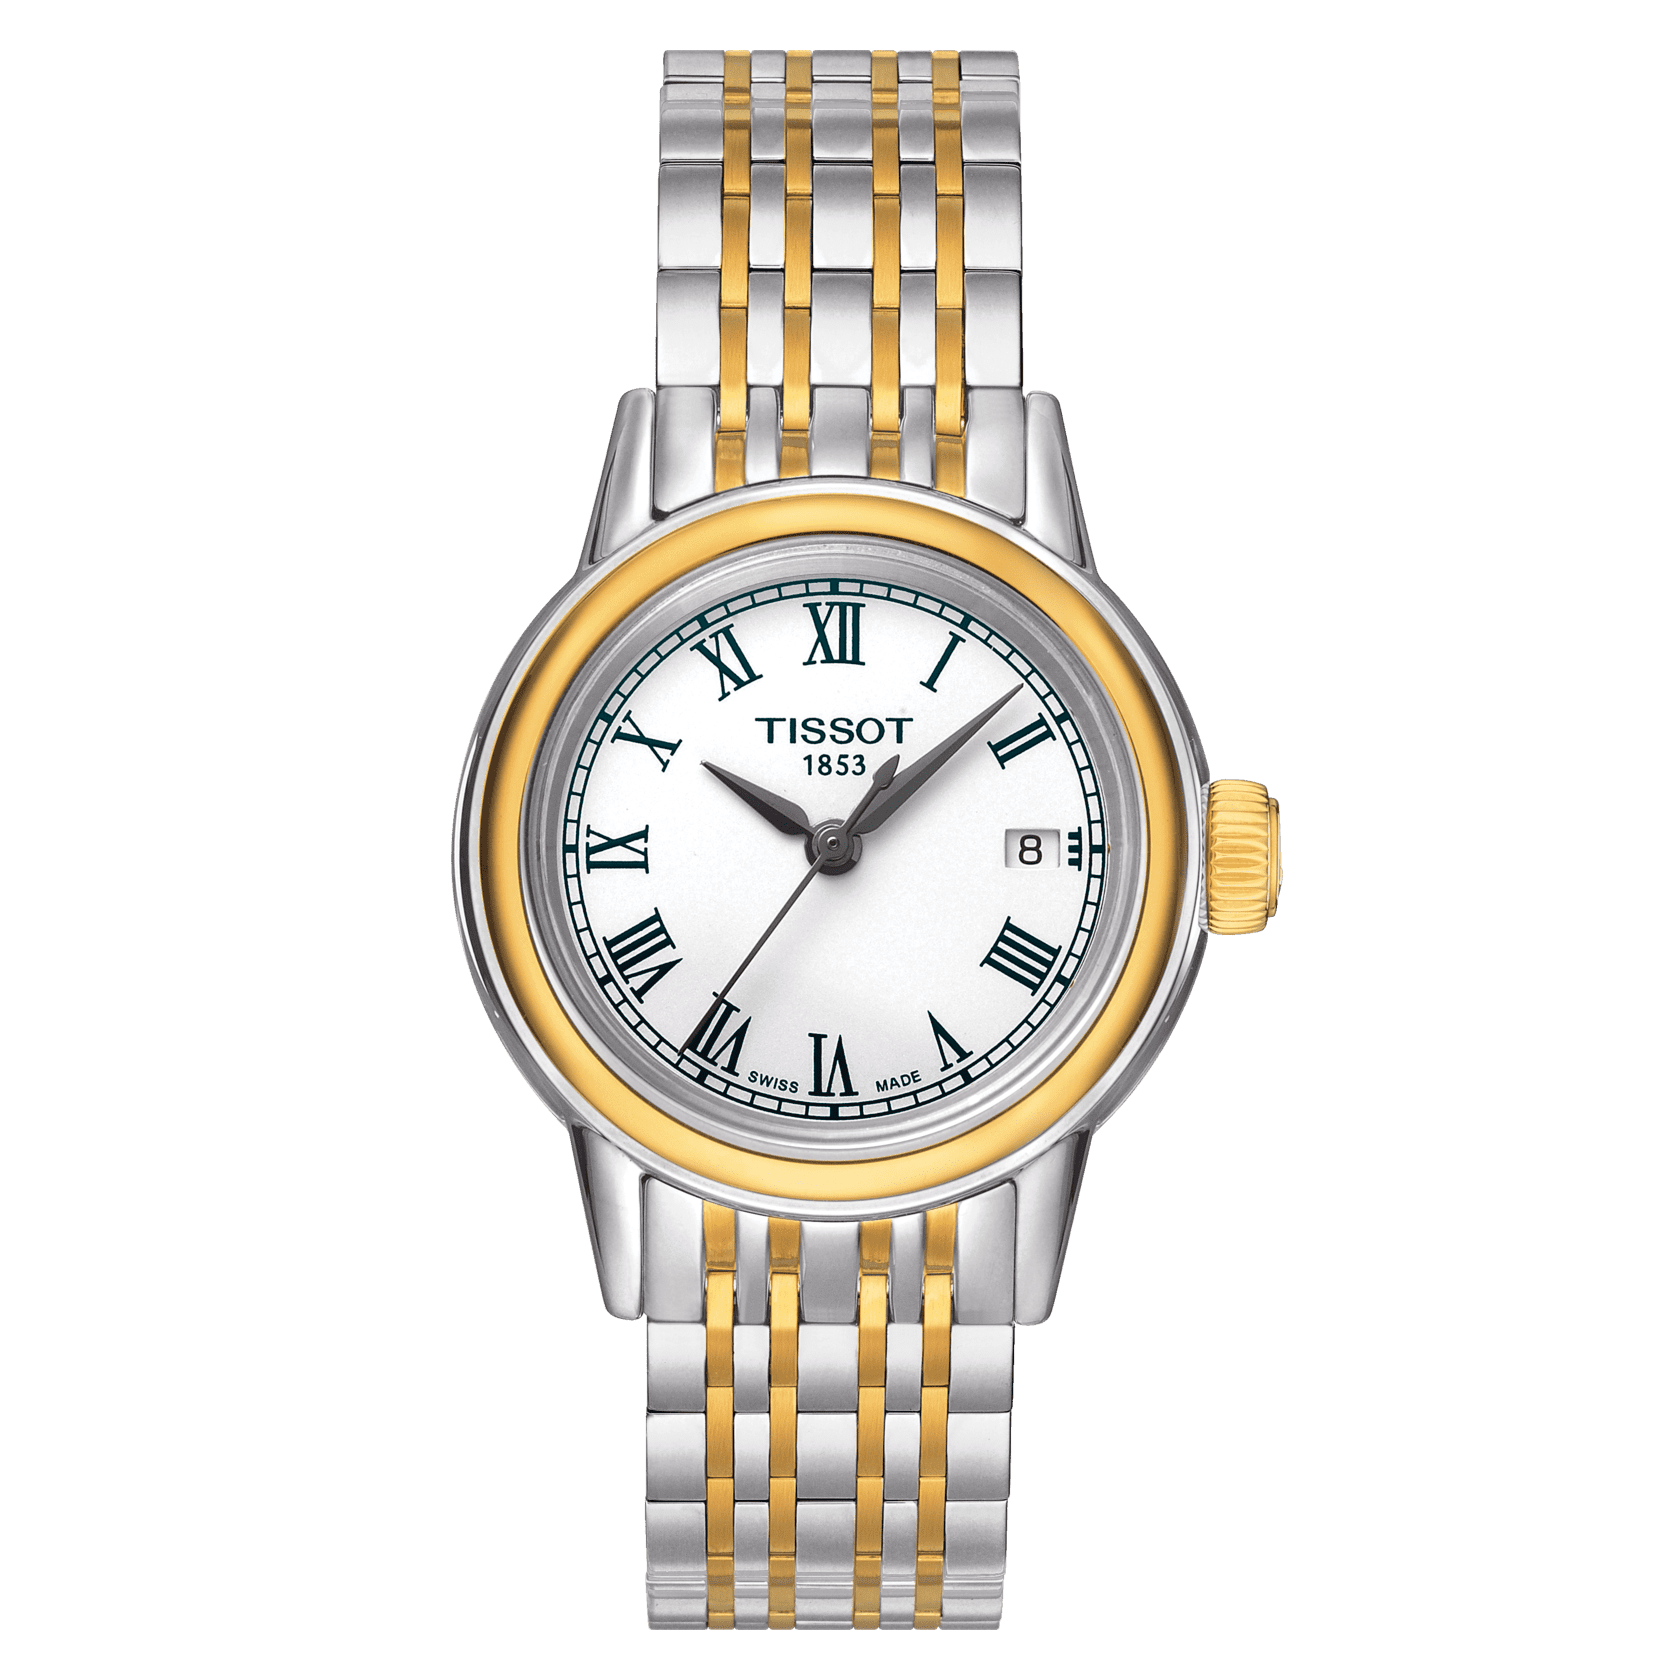 Replica Watches Recommended Site